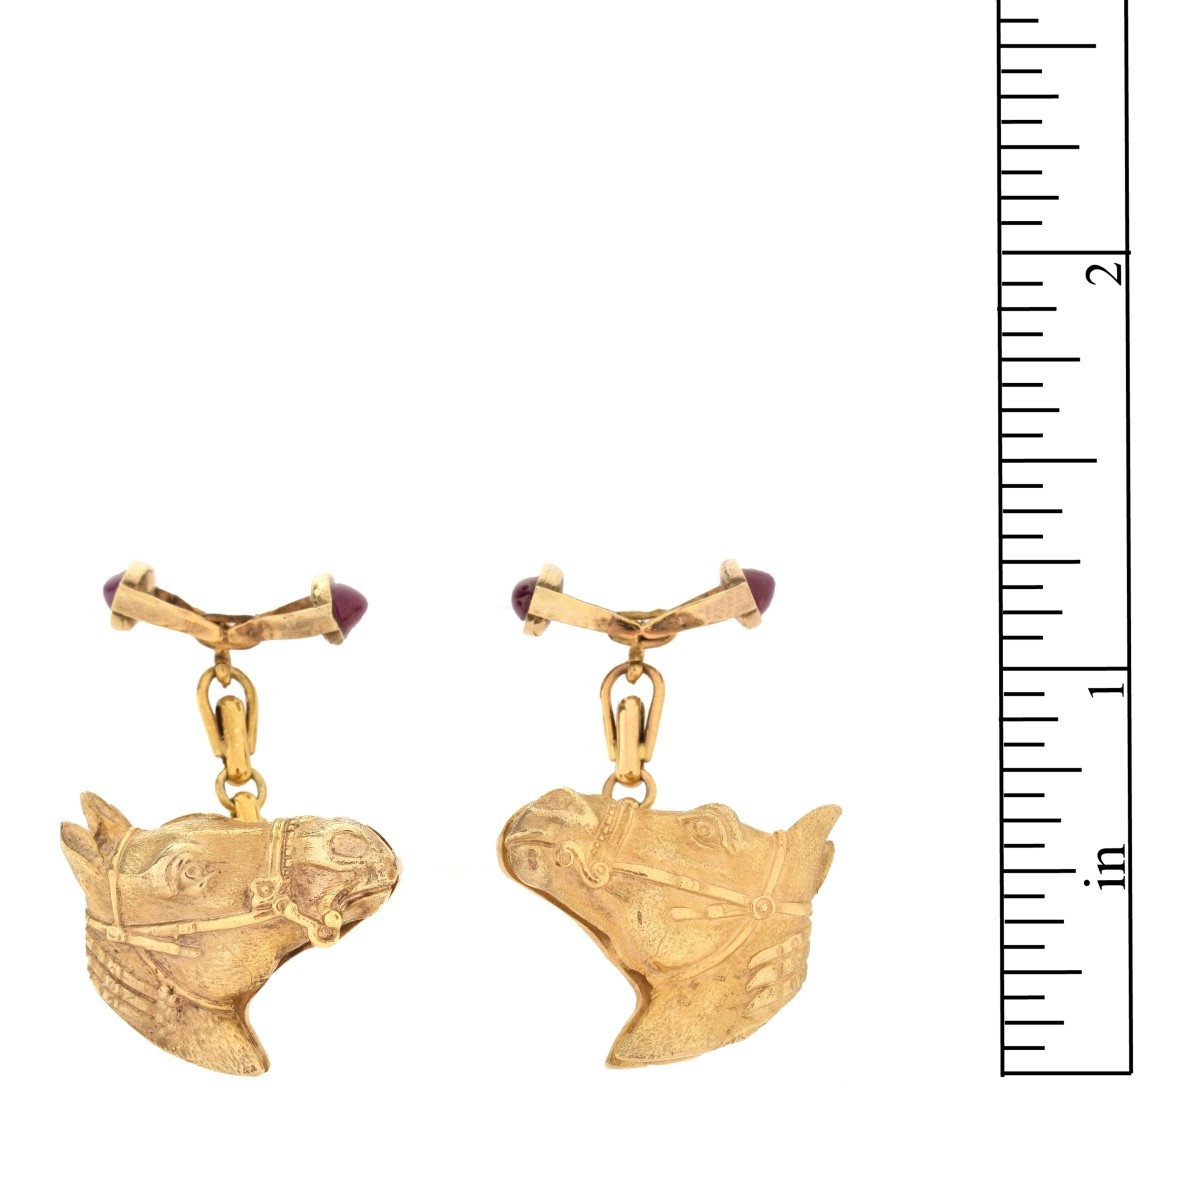 Russian Faberge 14K and Ruby Cufflinks